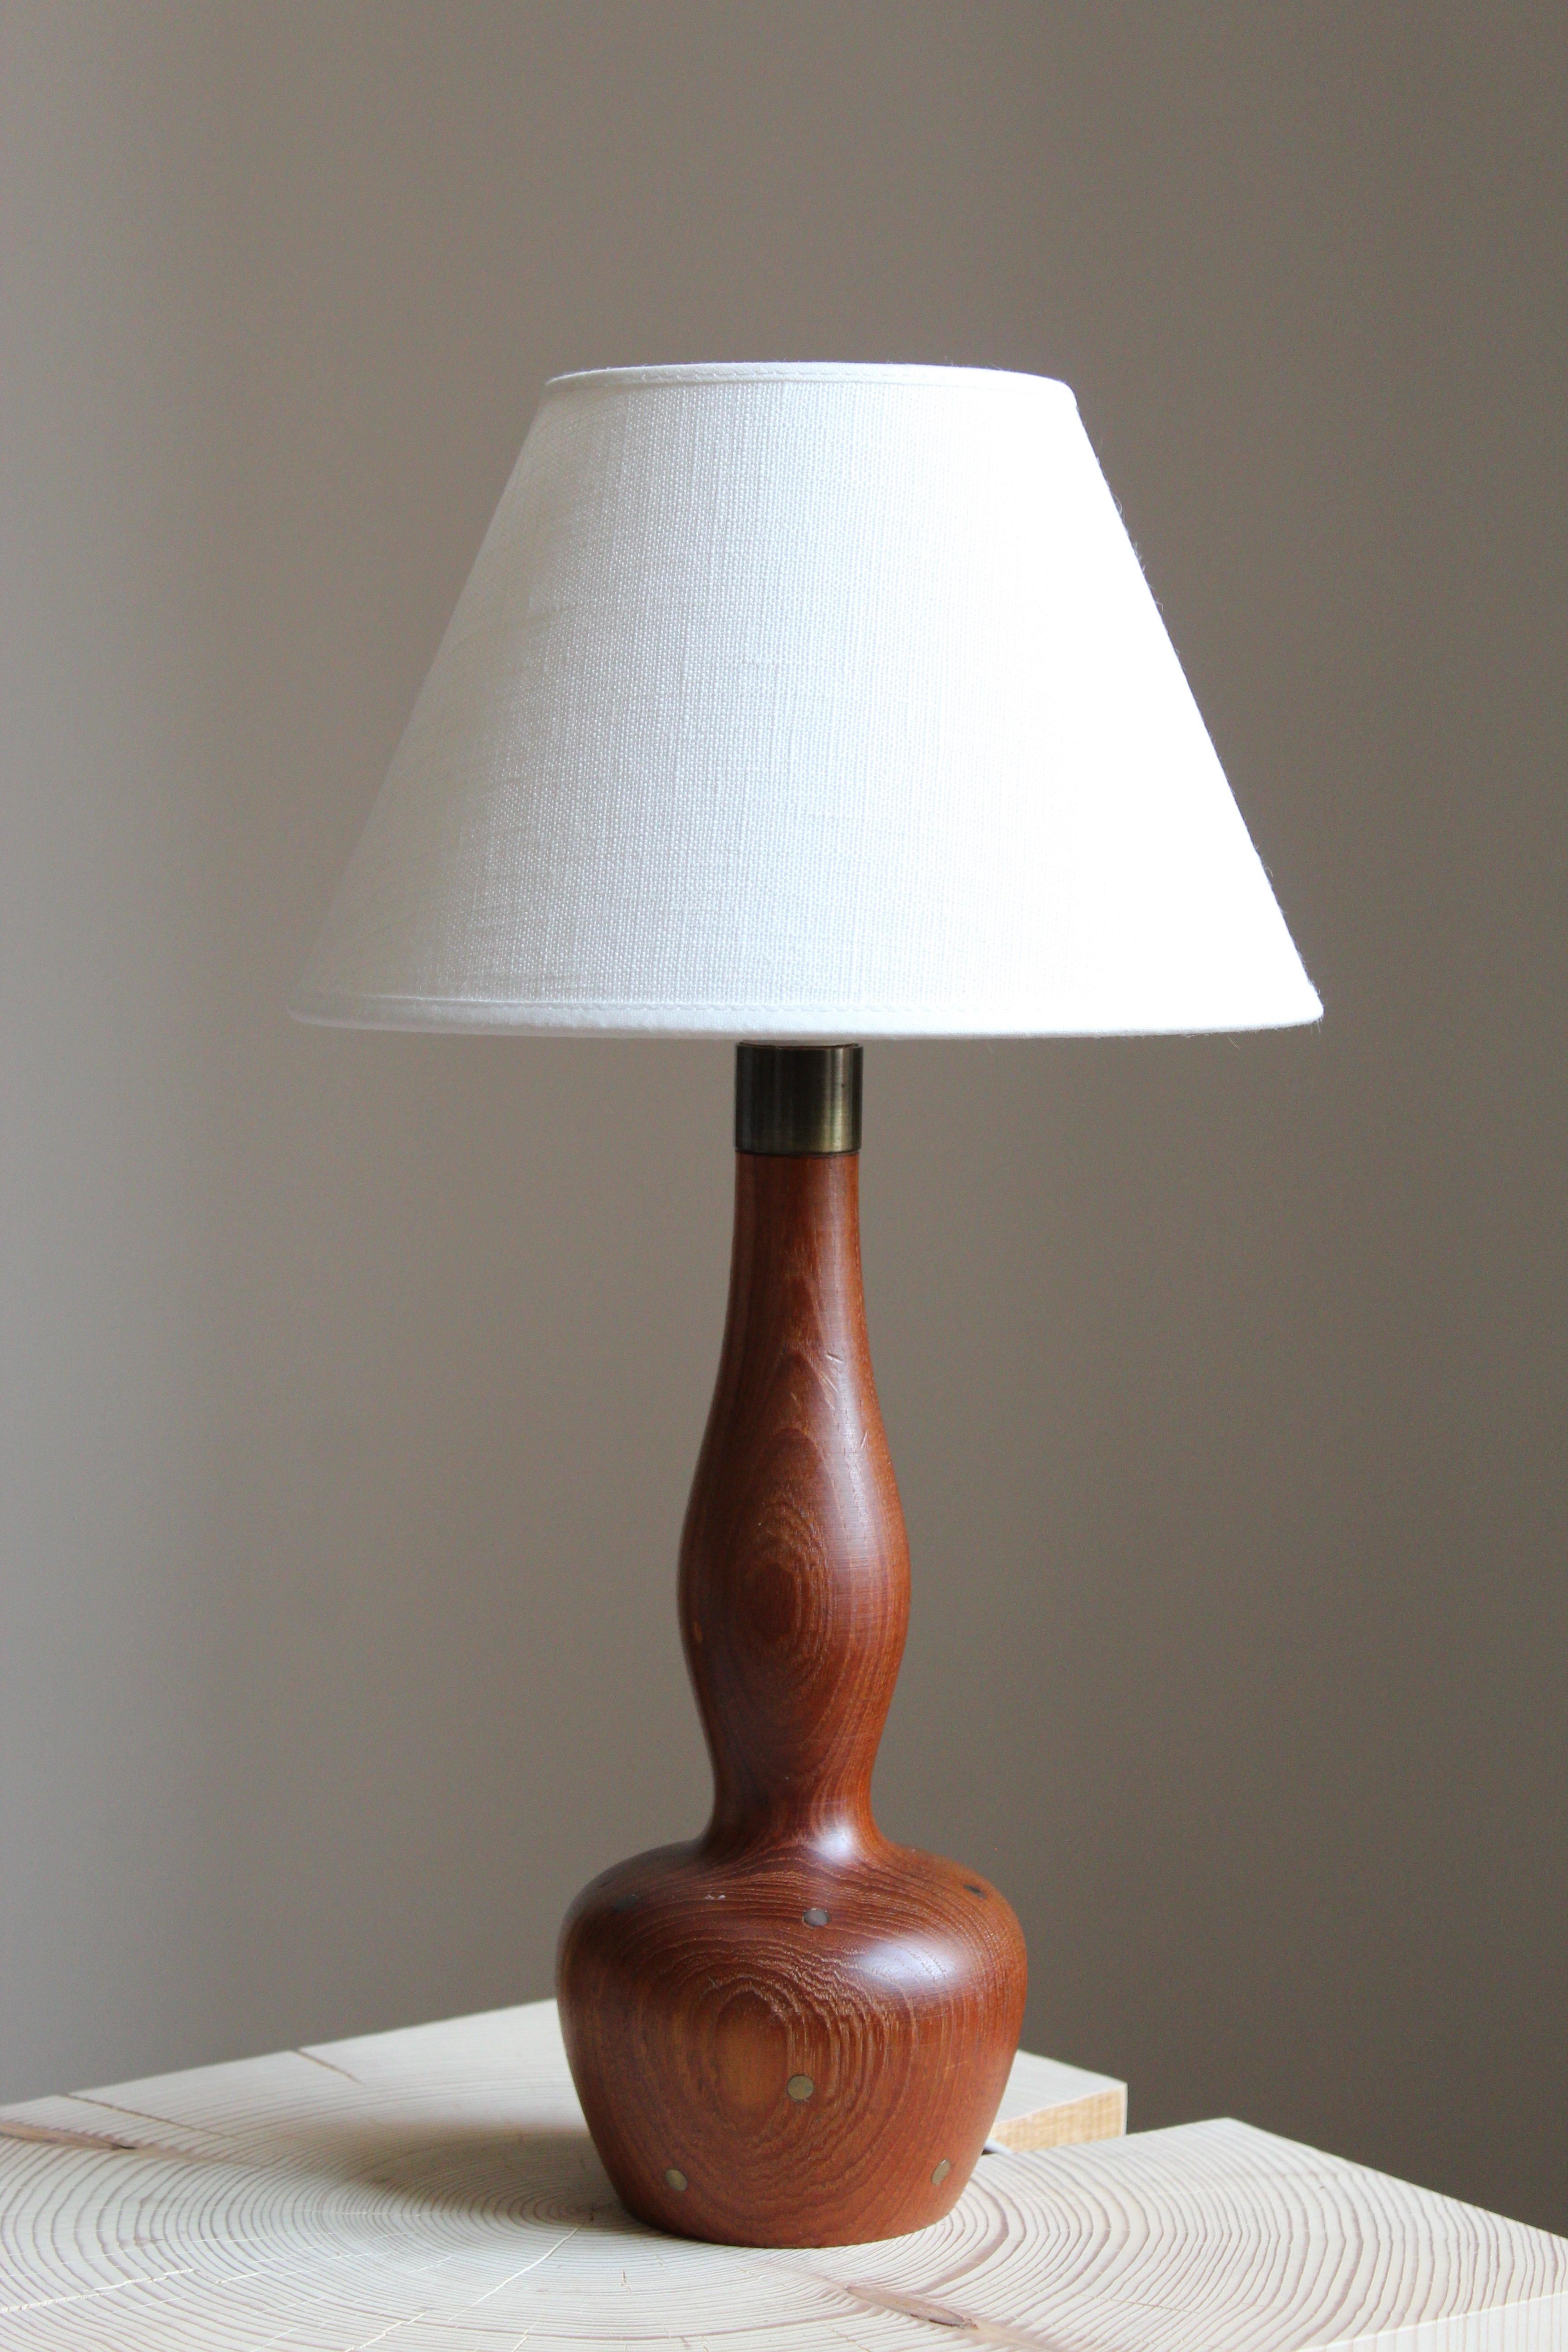 An organic table lamp. In solid teak, with superb brass inlays adding further appeal. Brand new linen lampshade.

Other designers of the period include Finn Juhl, Hans Wegner, Kaare Klint, Alvar Aalto, and Paavo Tynell.